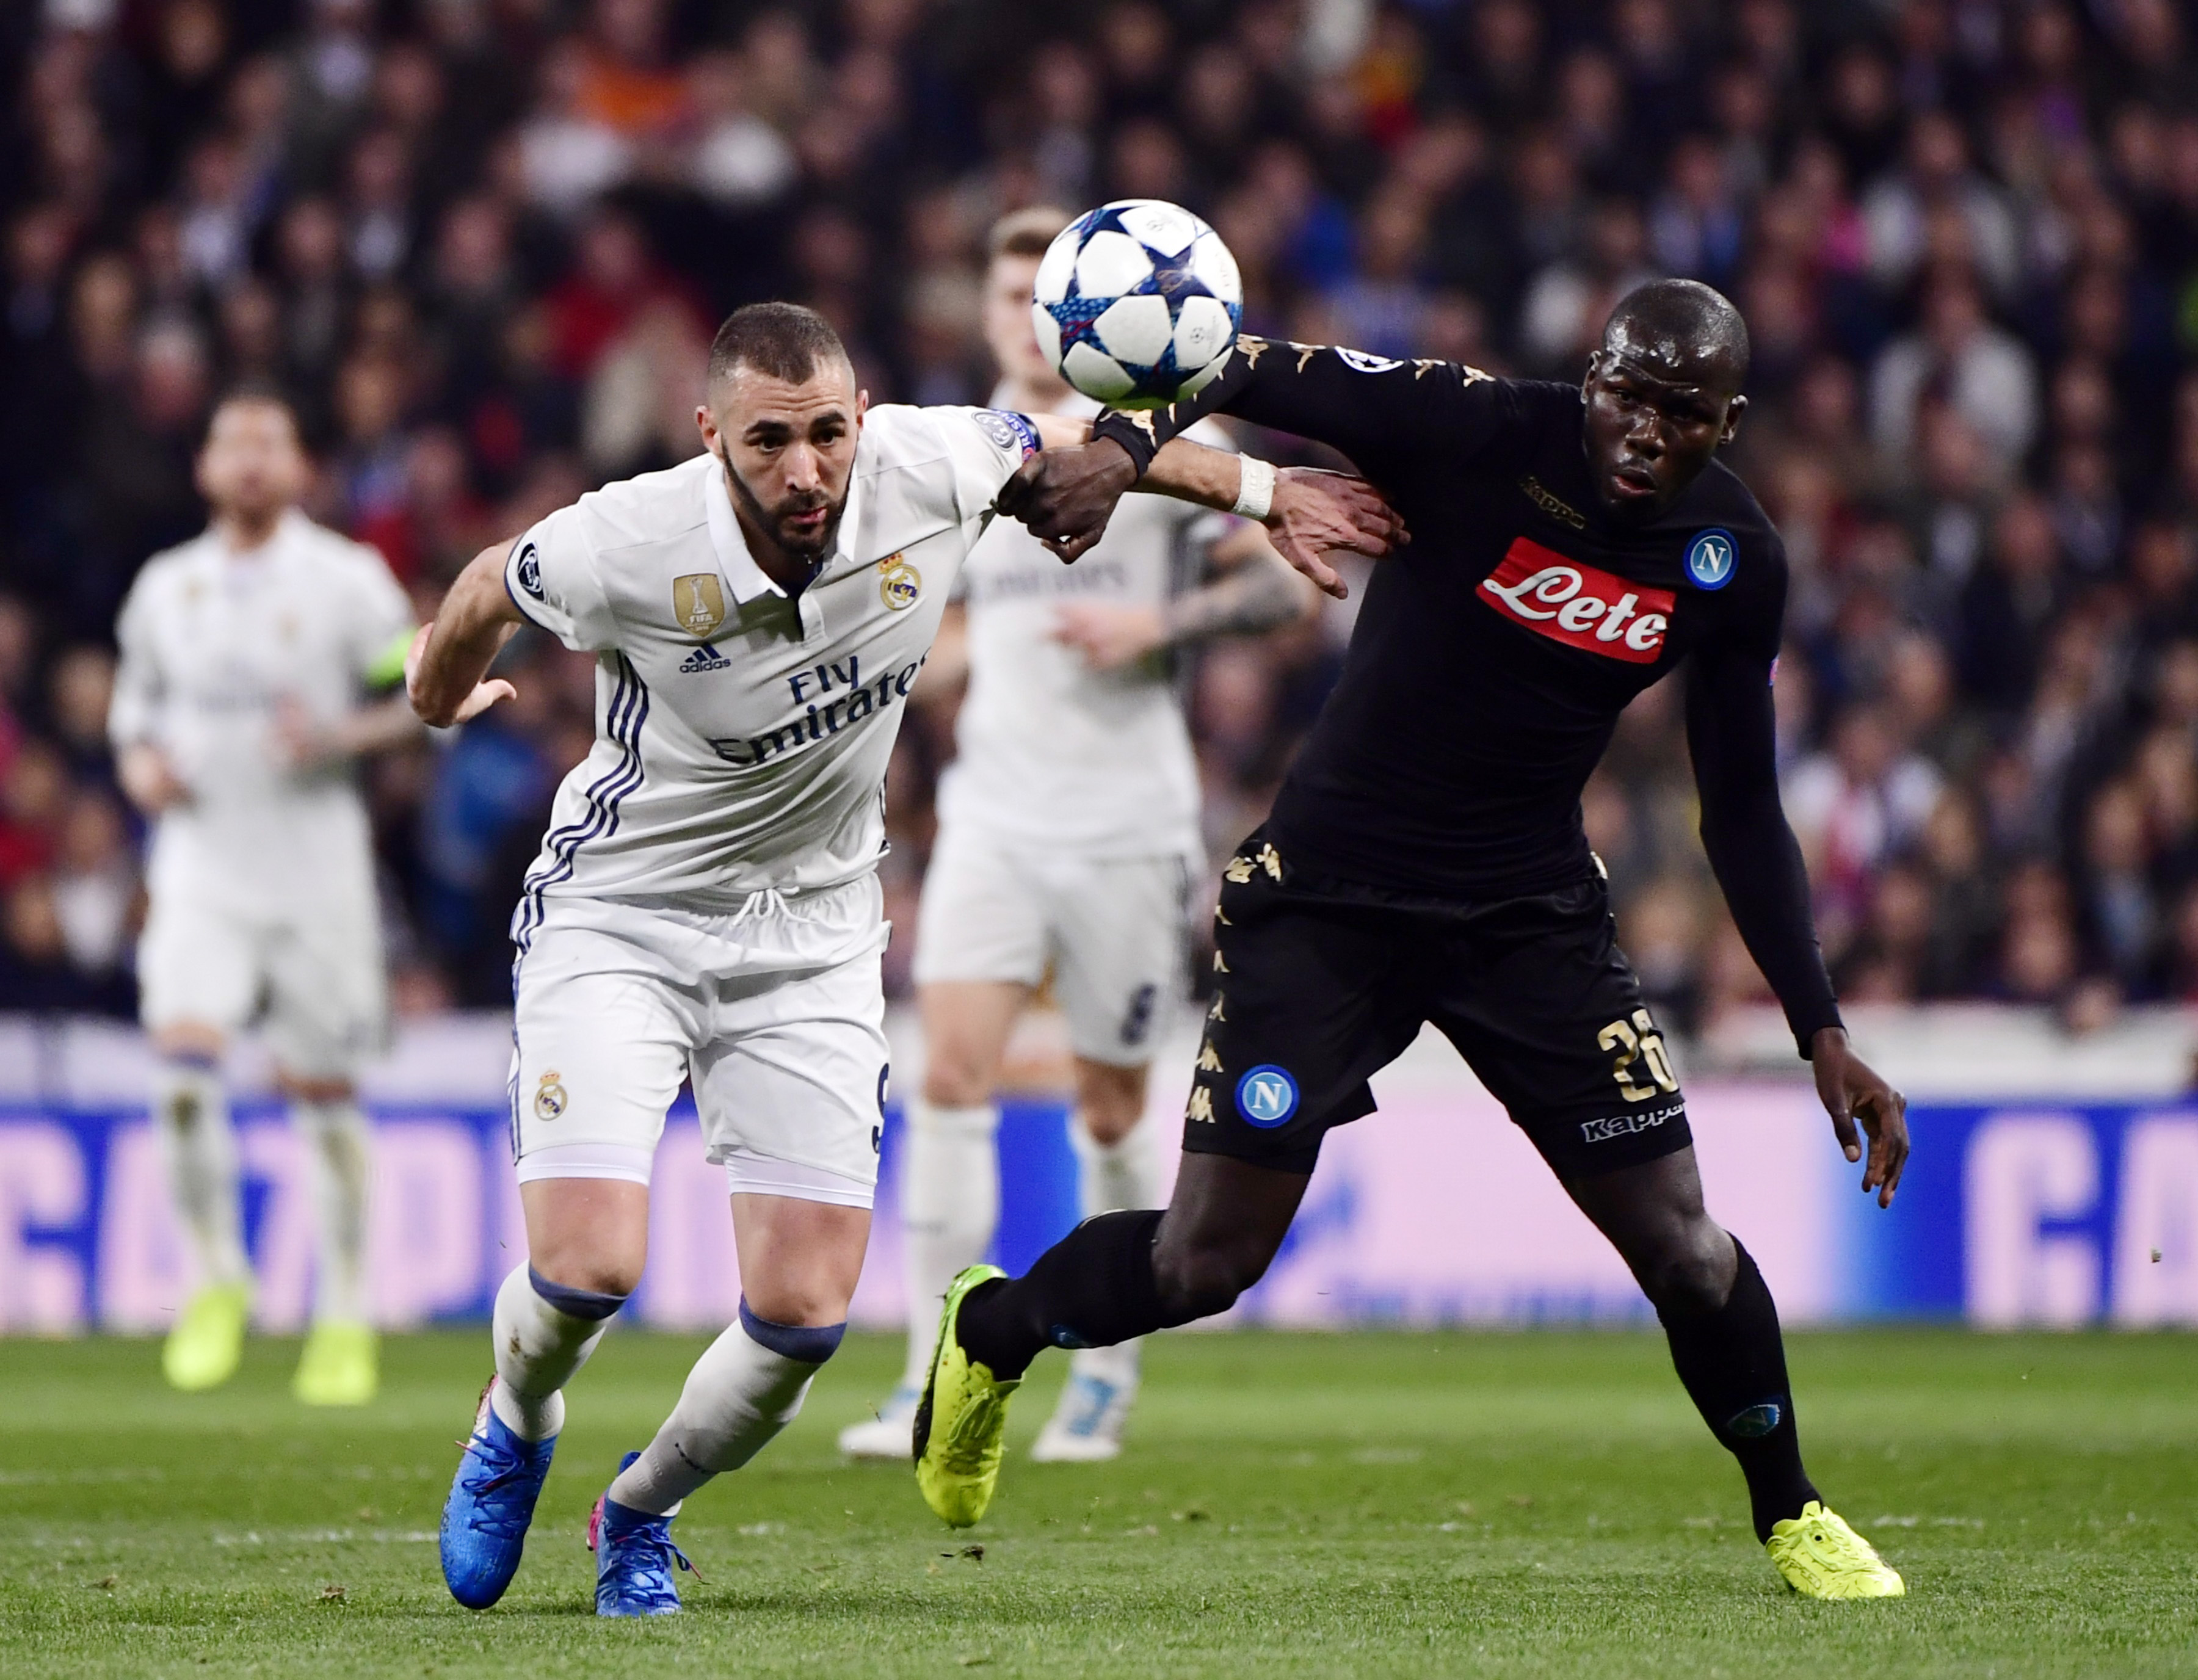 Real Madrid's French forward Karim Benzema (L) vies with Napoli's defender from France Kalidou Koulibaly during the UEFA Champions League round of 16 first leg football match Real Madrid CF vs SSC Napoli at the Santiago Bernabeu stadium in Madrid on February 15, 2017. / AFP / PIERRE-PHILIPPE MARCOU        (Photo credit should read PIERRE-PHILIPPE MARCOU/AFP/Getty Images)